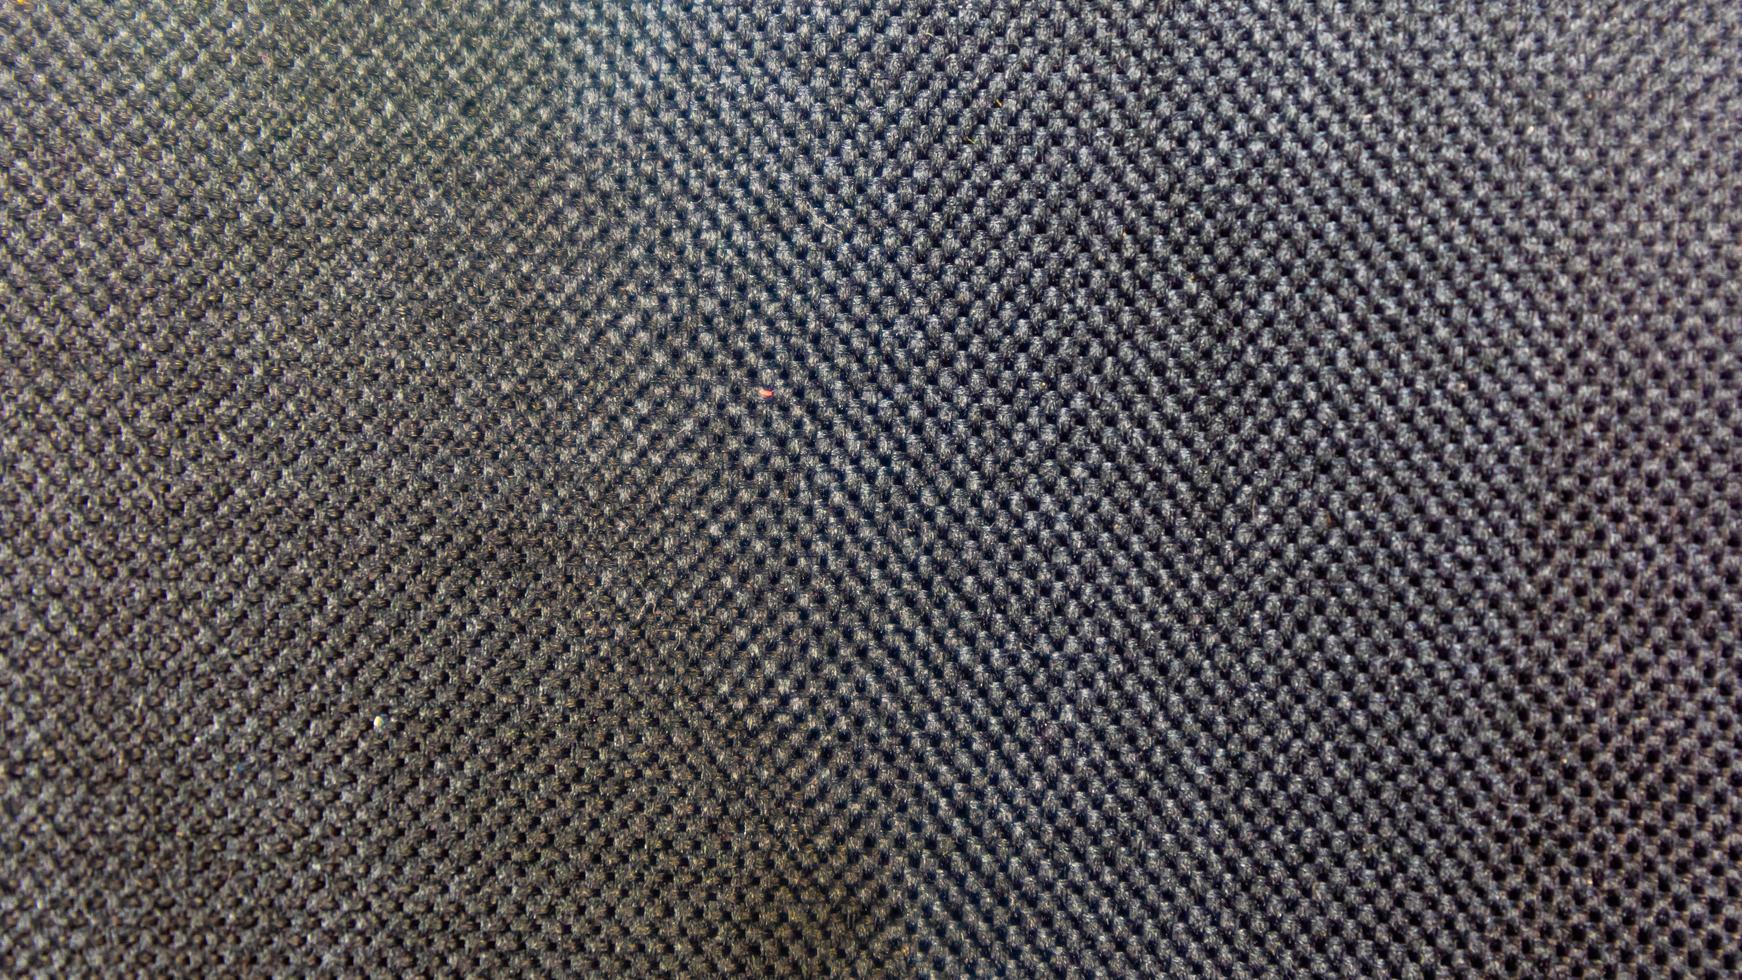 black bag texture as the background photo